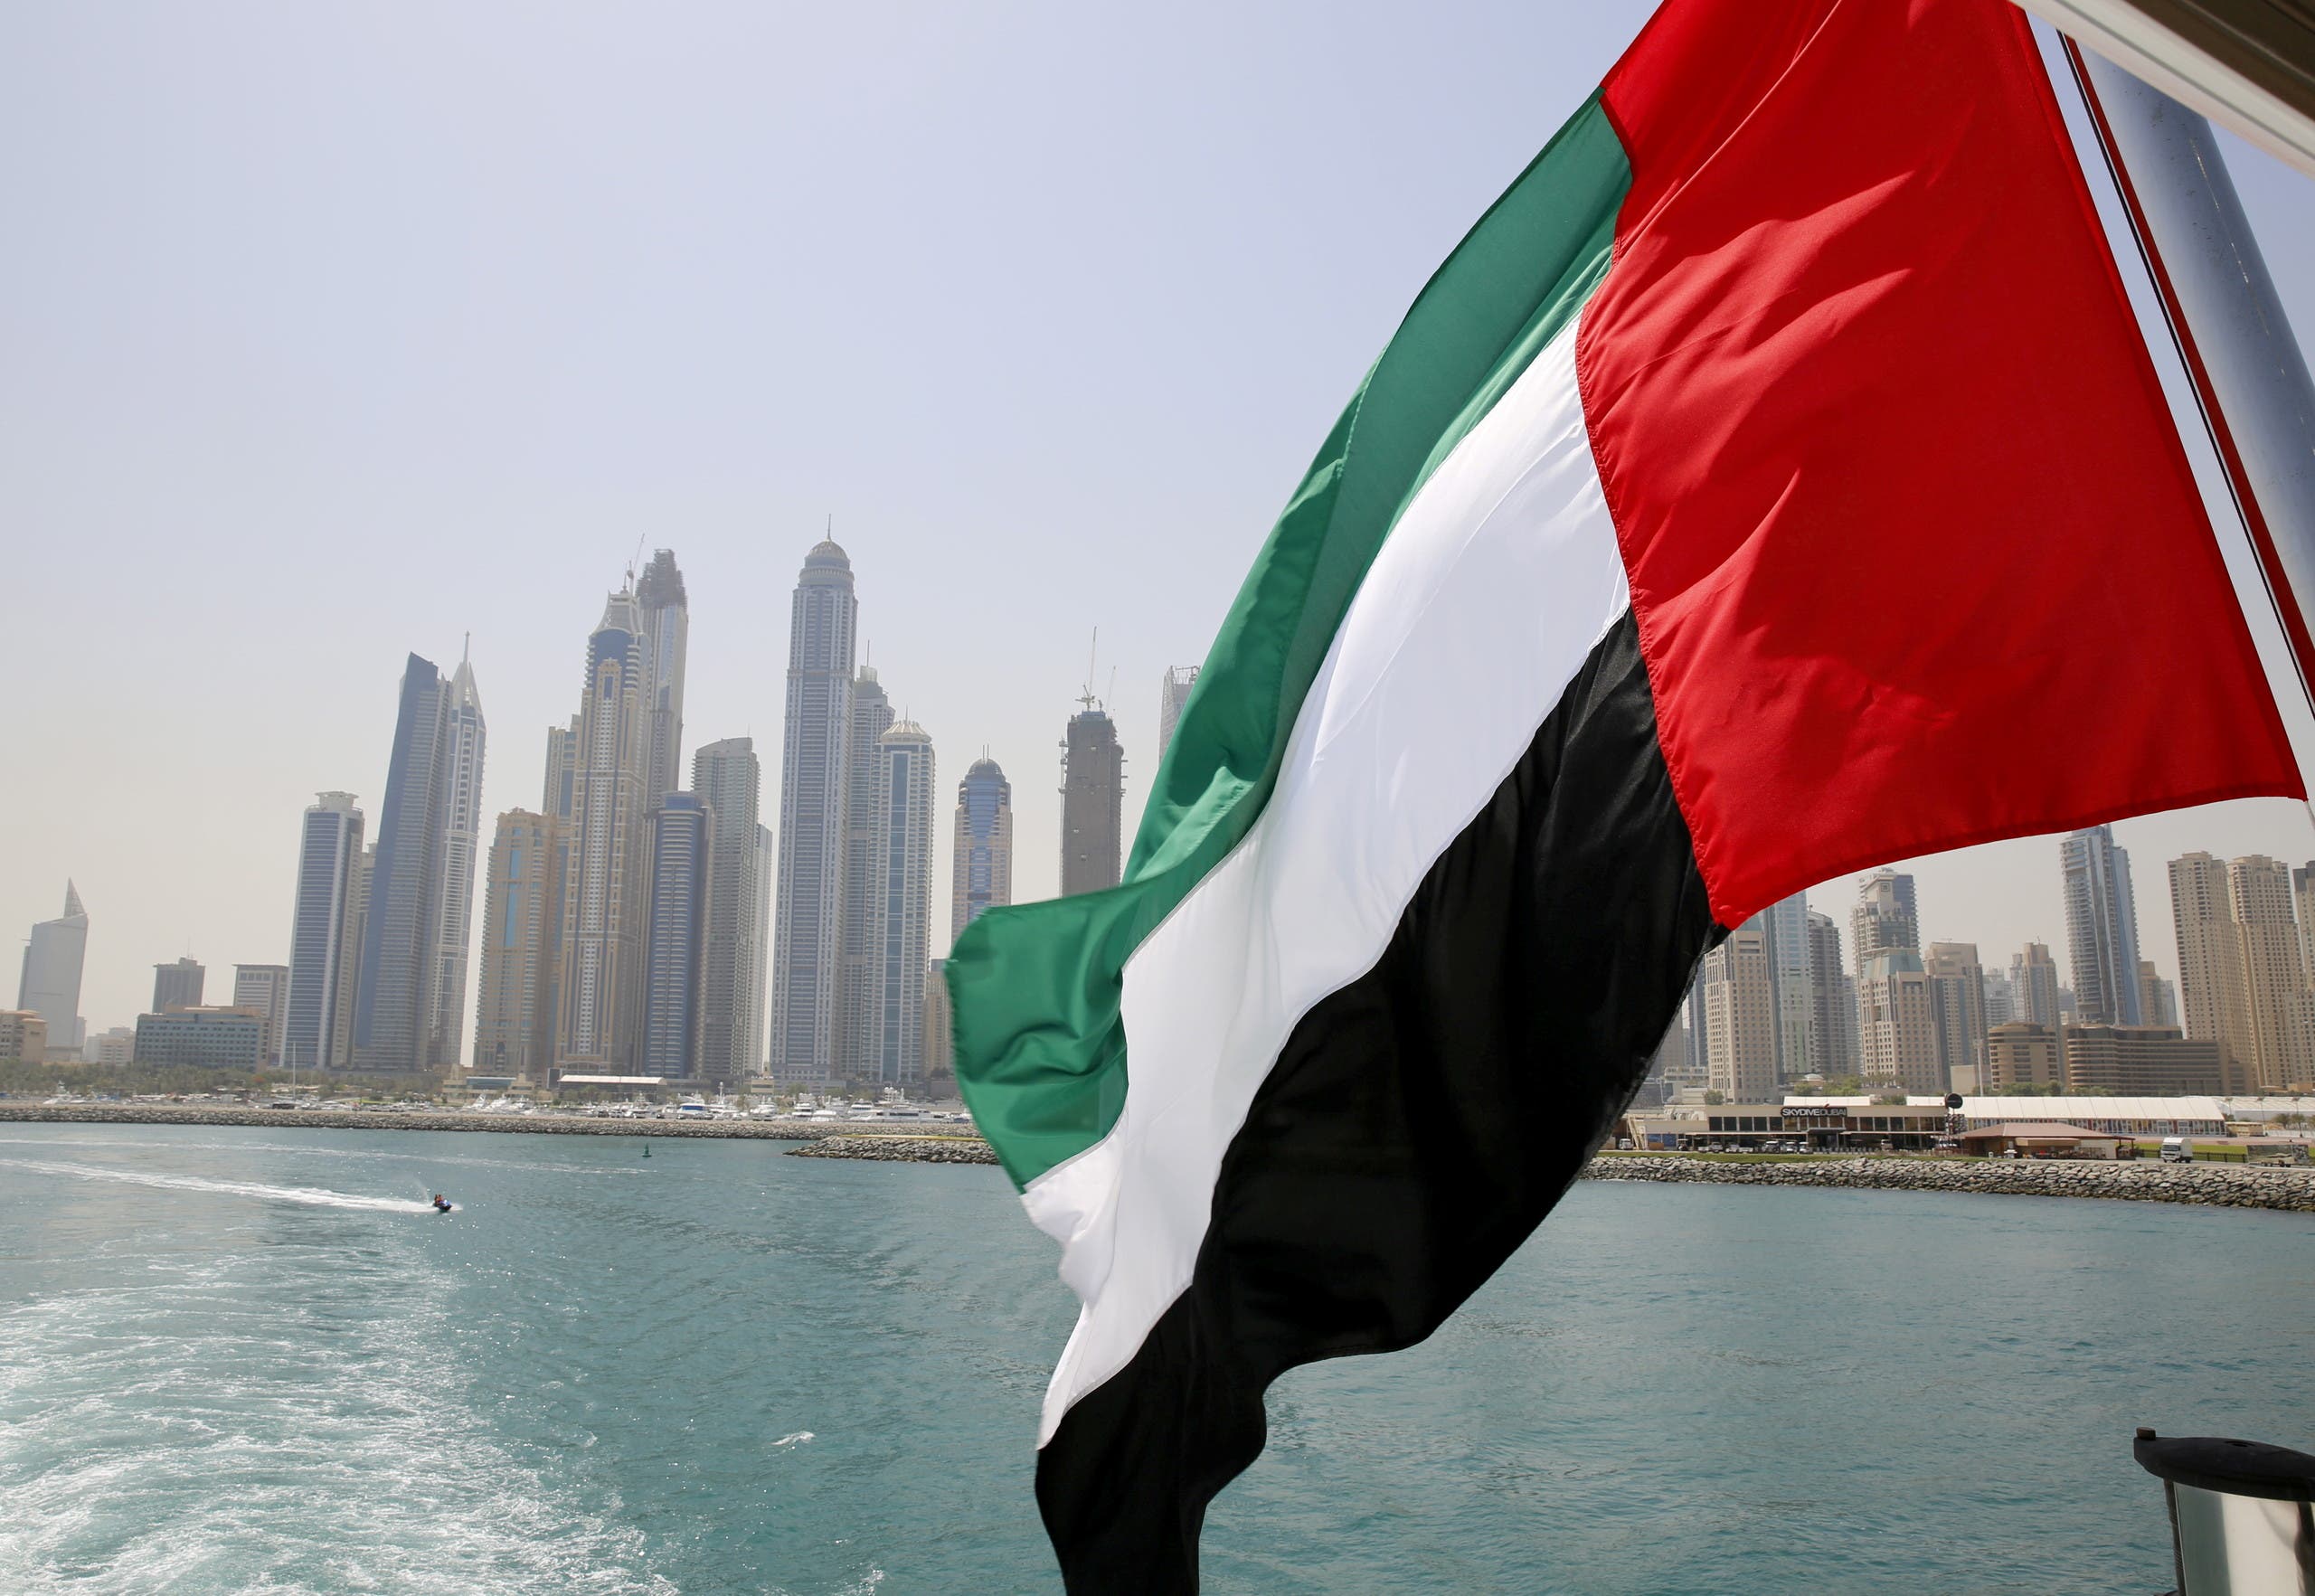 New UAE labor laws announced, changes made to safeguard employees&#39; rights |  Al Arabiya English